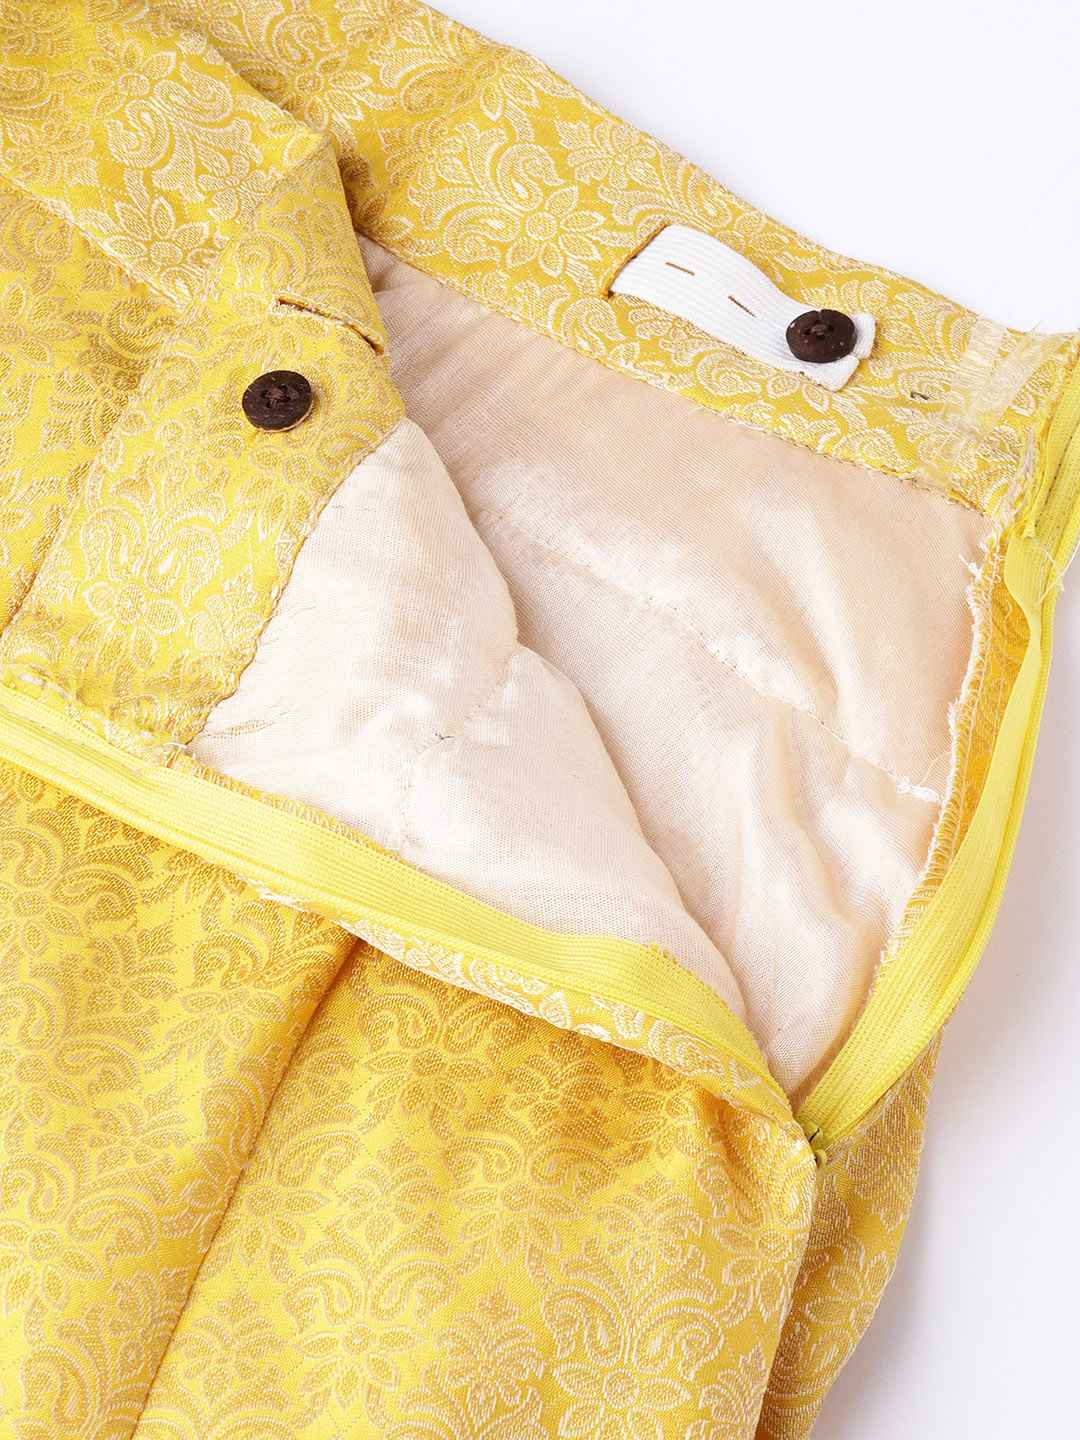 AKS-Yellow-and-Golden-Woven-Design-Brocade-Ready-to-Wear-Lehenga-with-Blouse